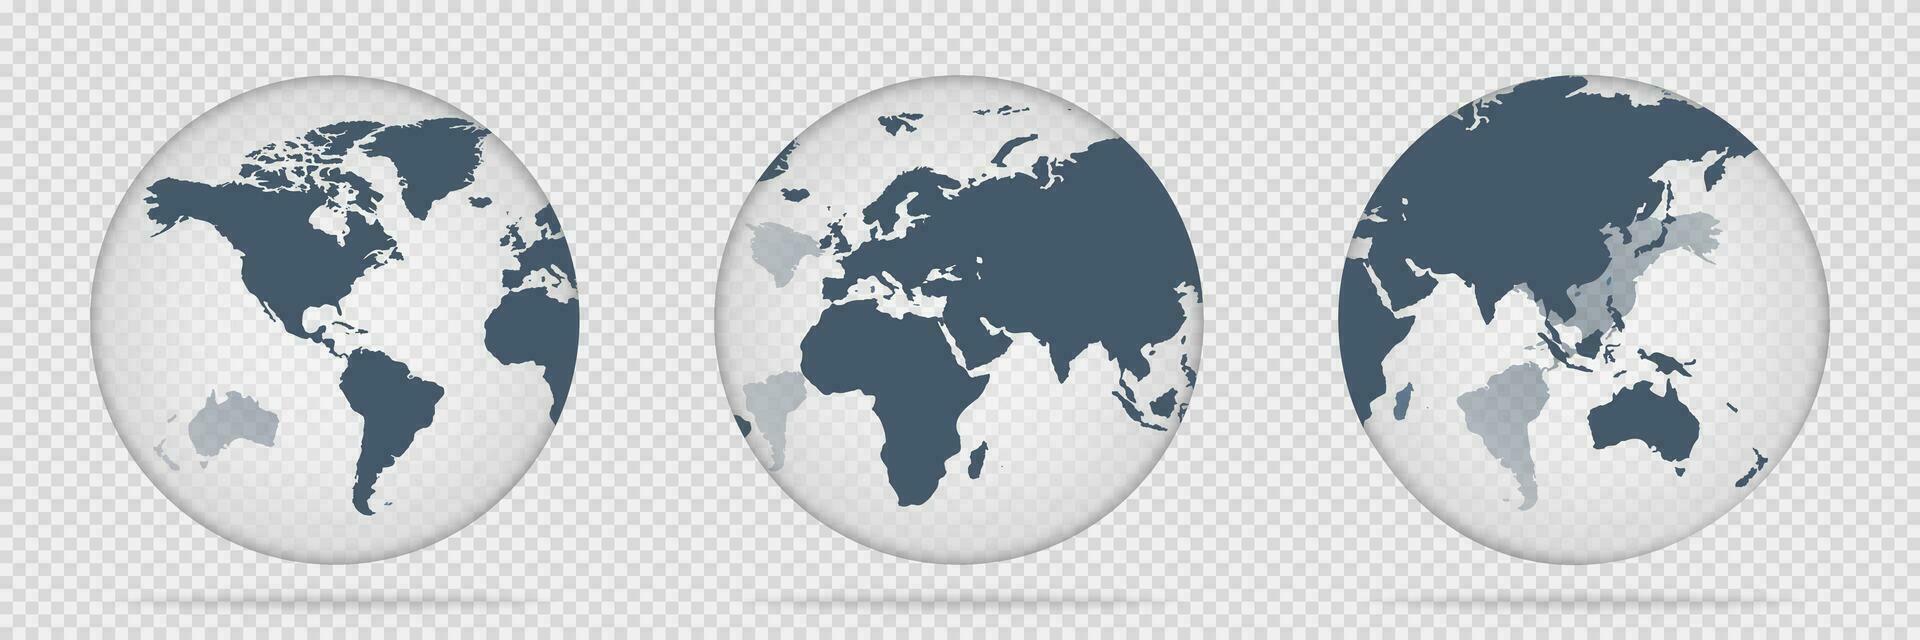 Transparent globe icon. Glass map of world. Planet vector in 3D. Transparent sphere shape with continents. Realistic earth symbol with shadow. Worldwide concept. EPS 10.